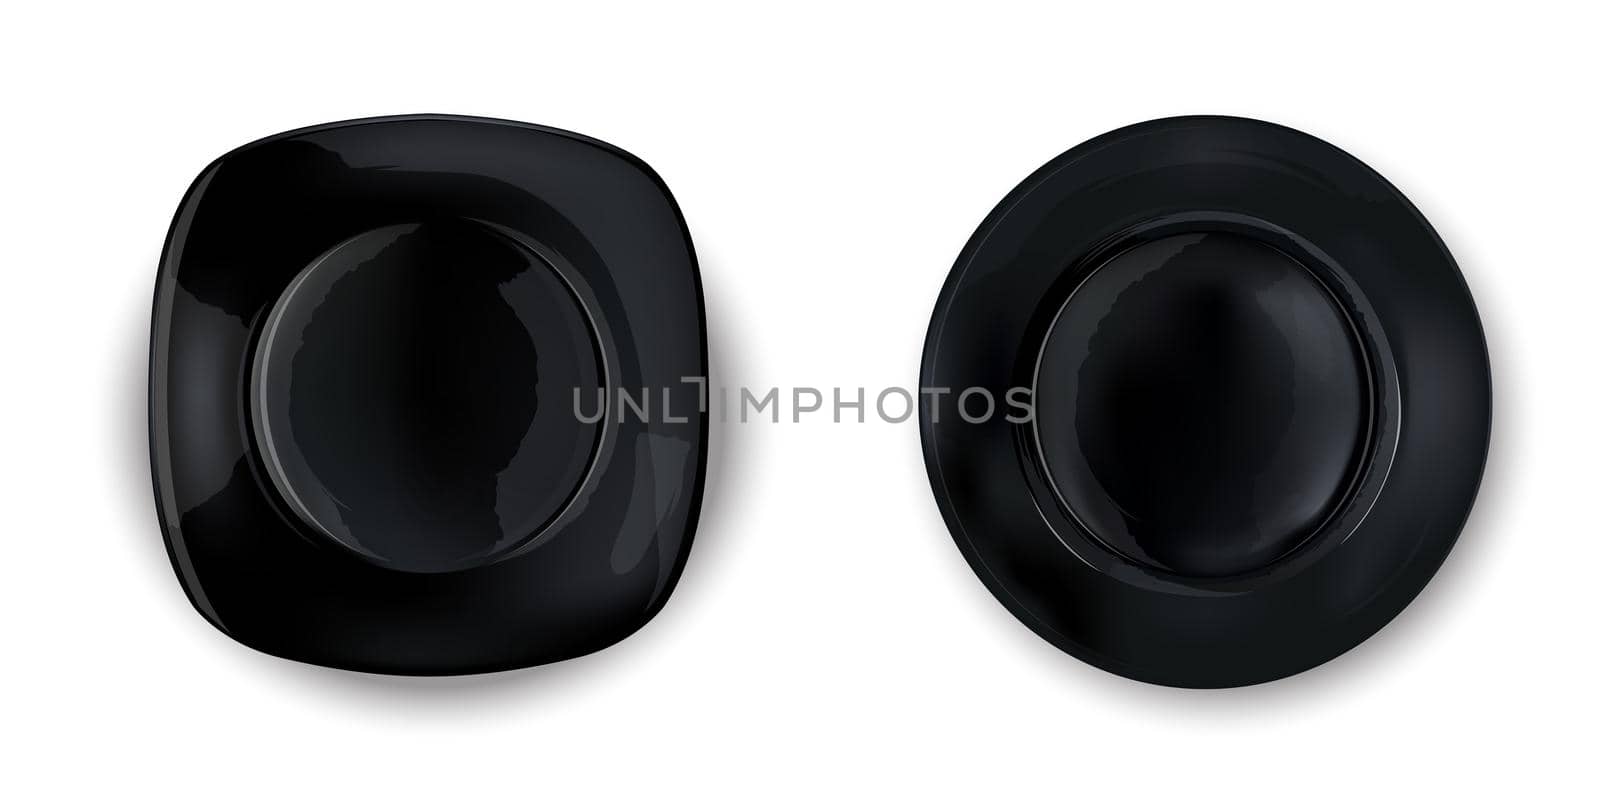 Two empty black plates of different shapes in a realistic style on a white background. Top view.